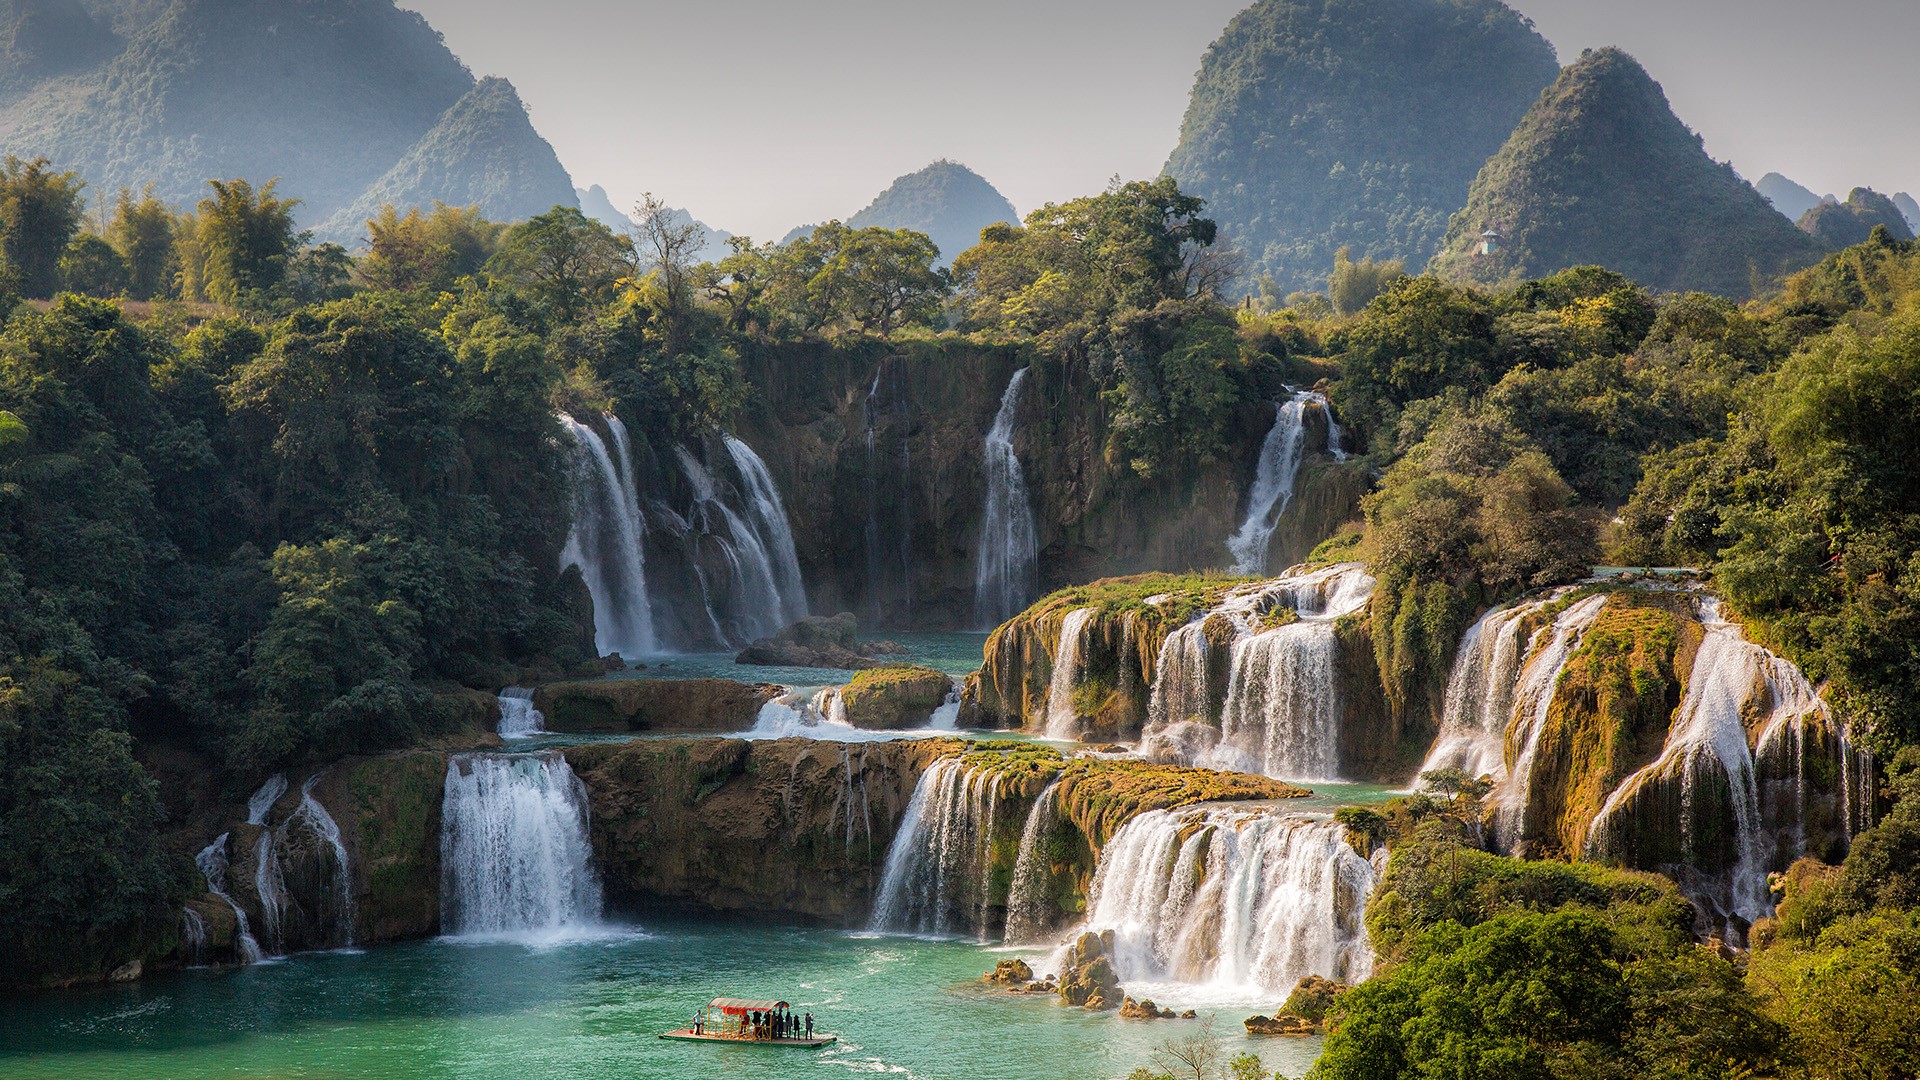 Lake Landscape China Vietnam Forest Mountains Water Boat Detian Falls Quay S N River Trees Waterfall 1920x1080